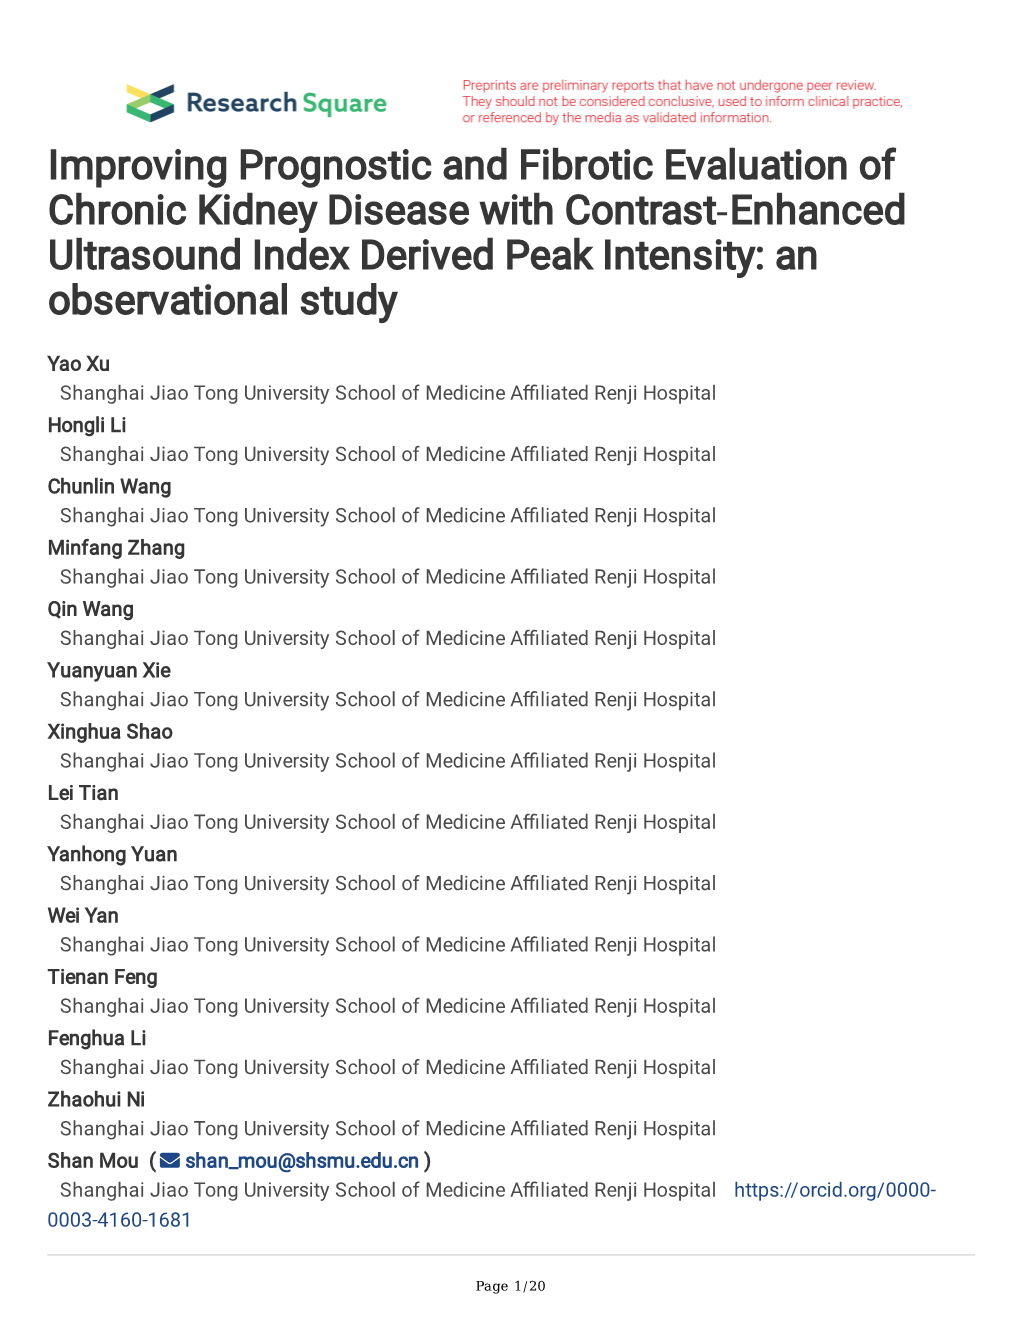 Improving Prognostic and Fibrotic Evaluation of Chronic Kidney Disease with Contrast‐Enhanced Ultrasound Index Derived Peak Intensity: an Observational Study